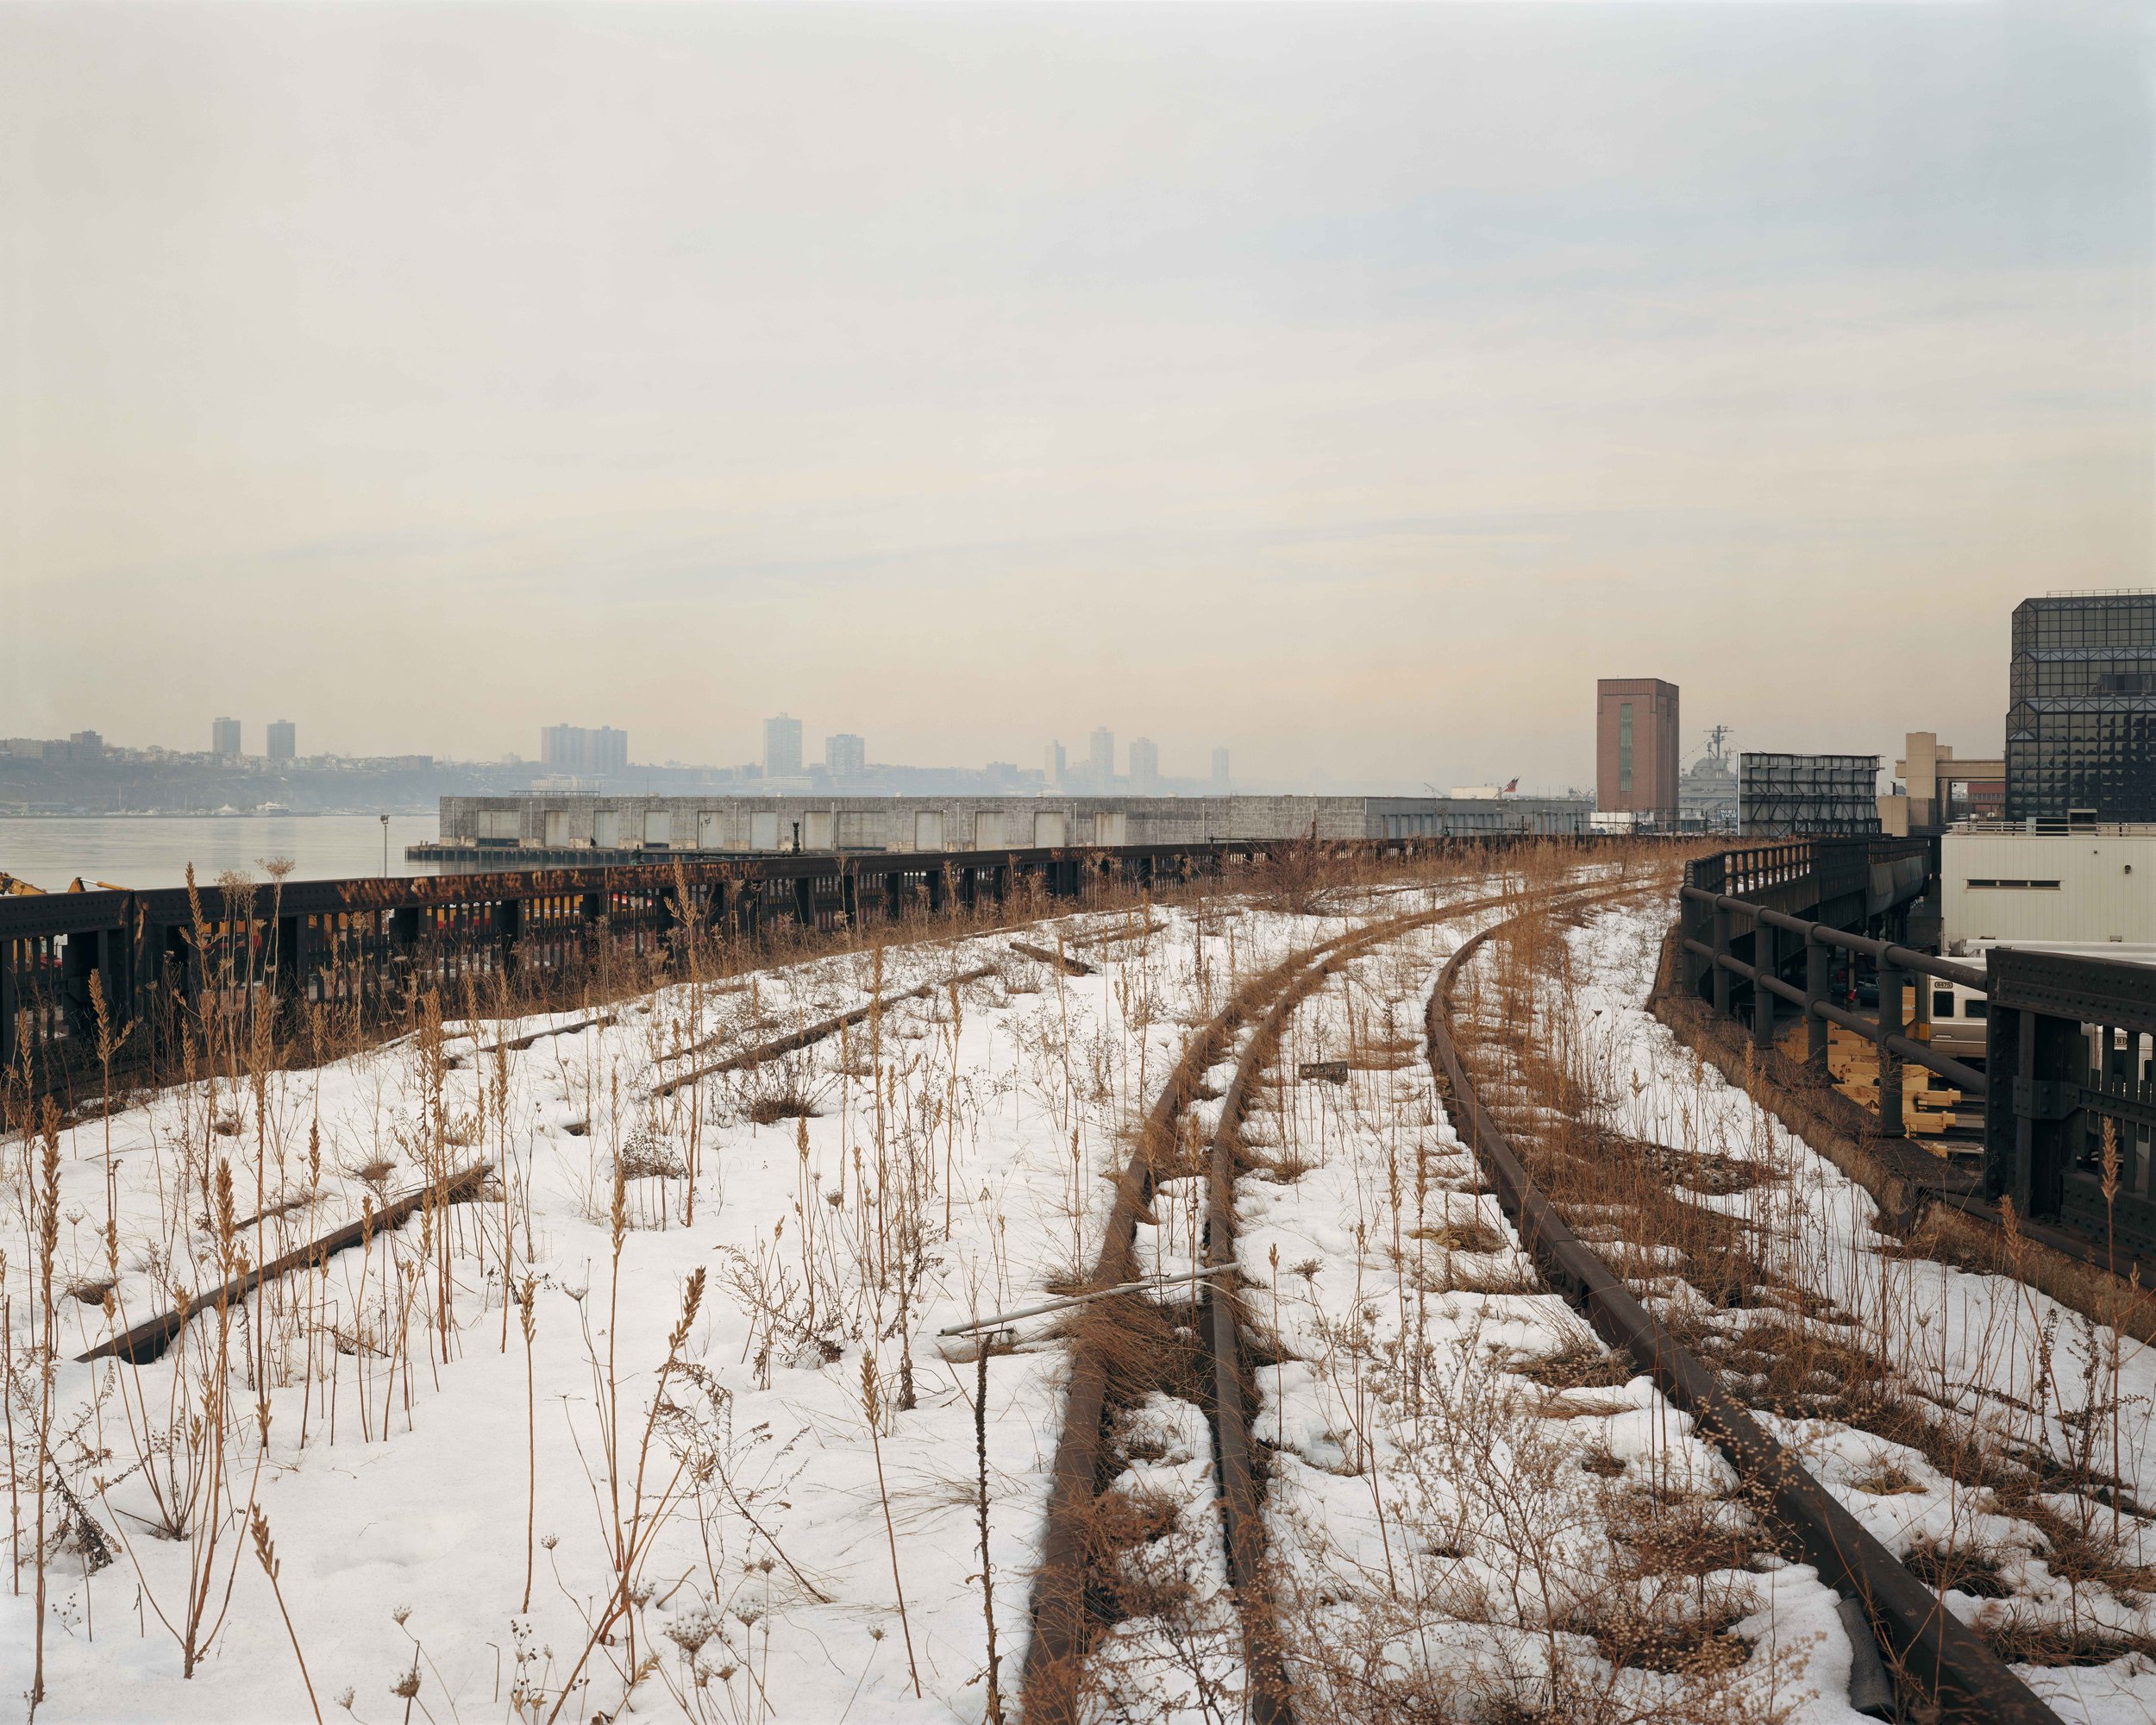 A View towards the Hudson, Late February 2001